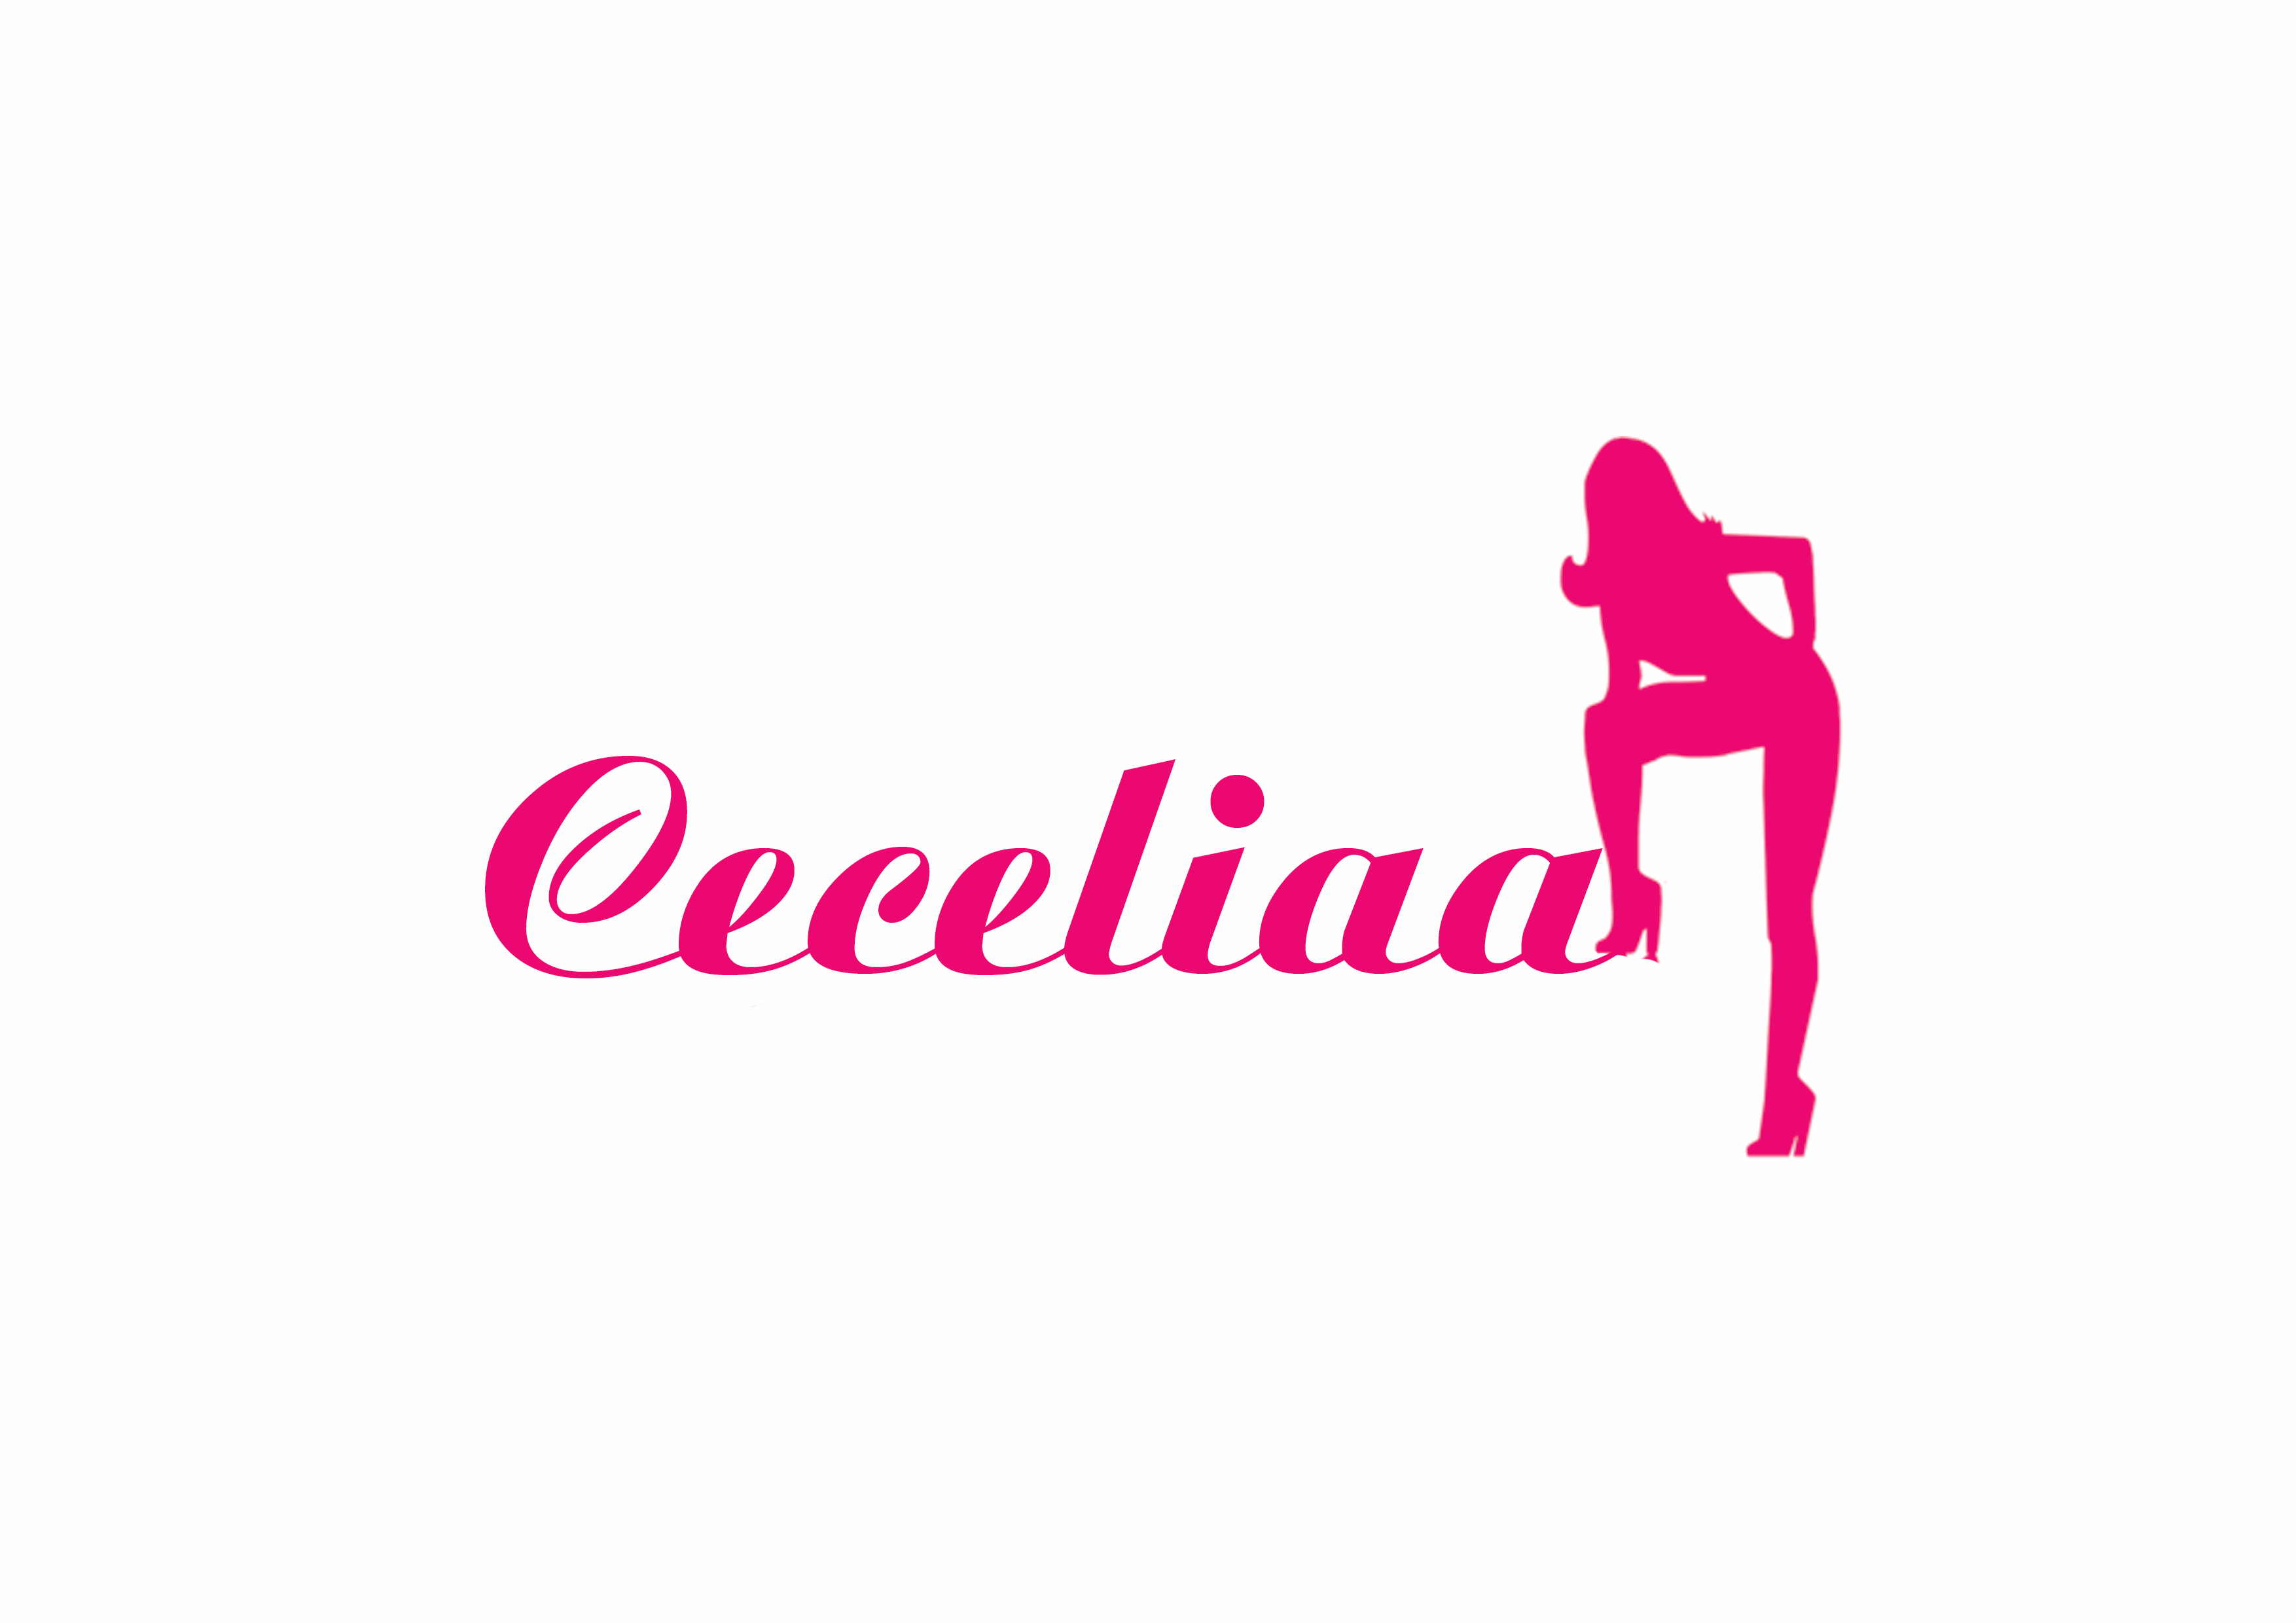 Ceceliaa  Project Picture